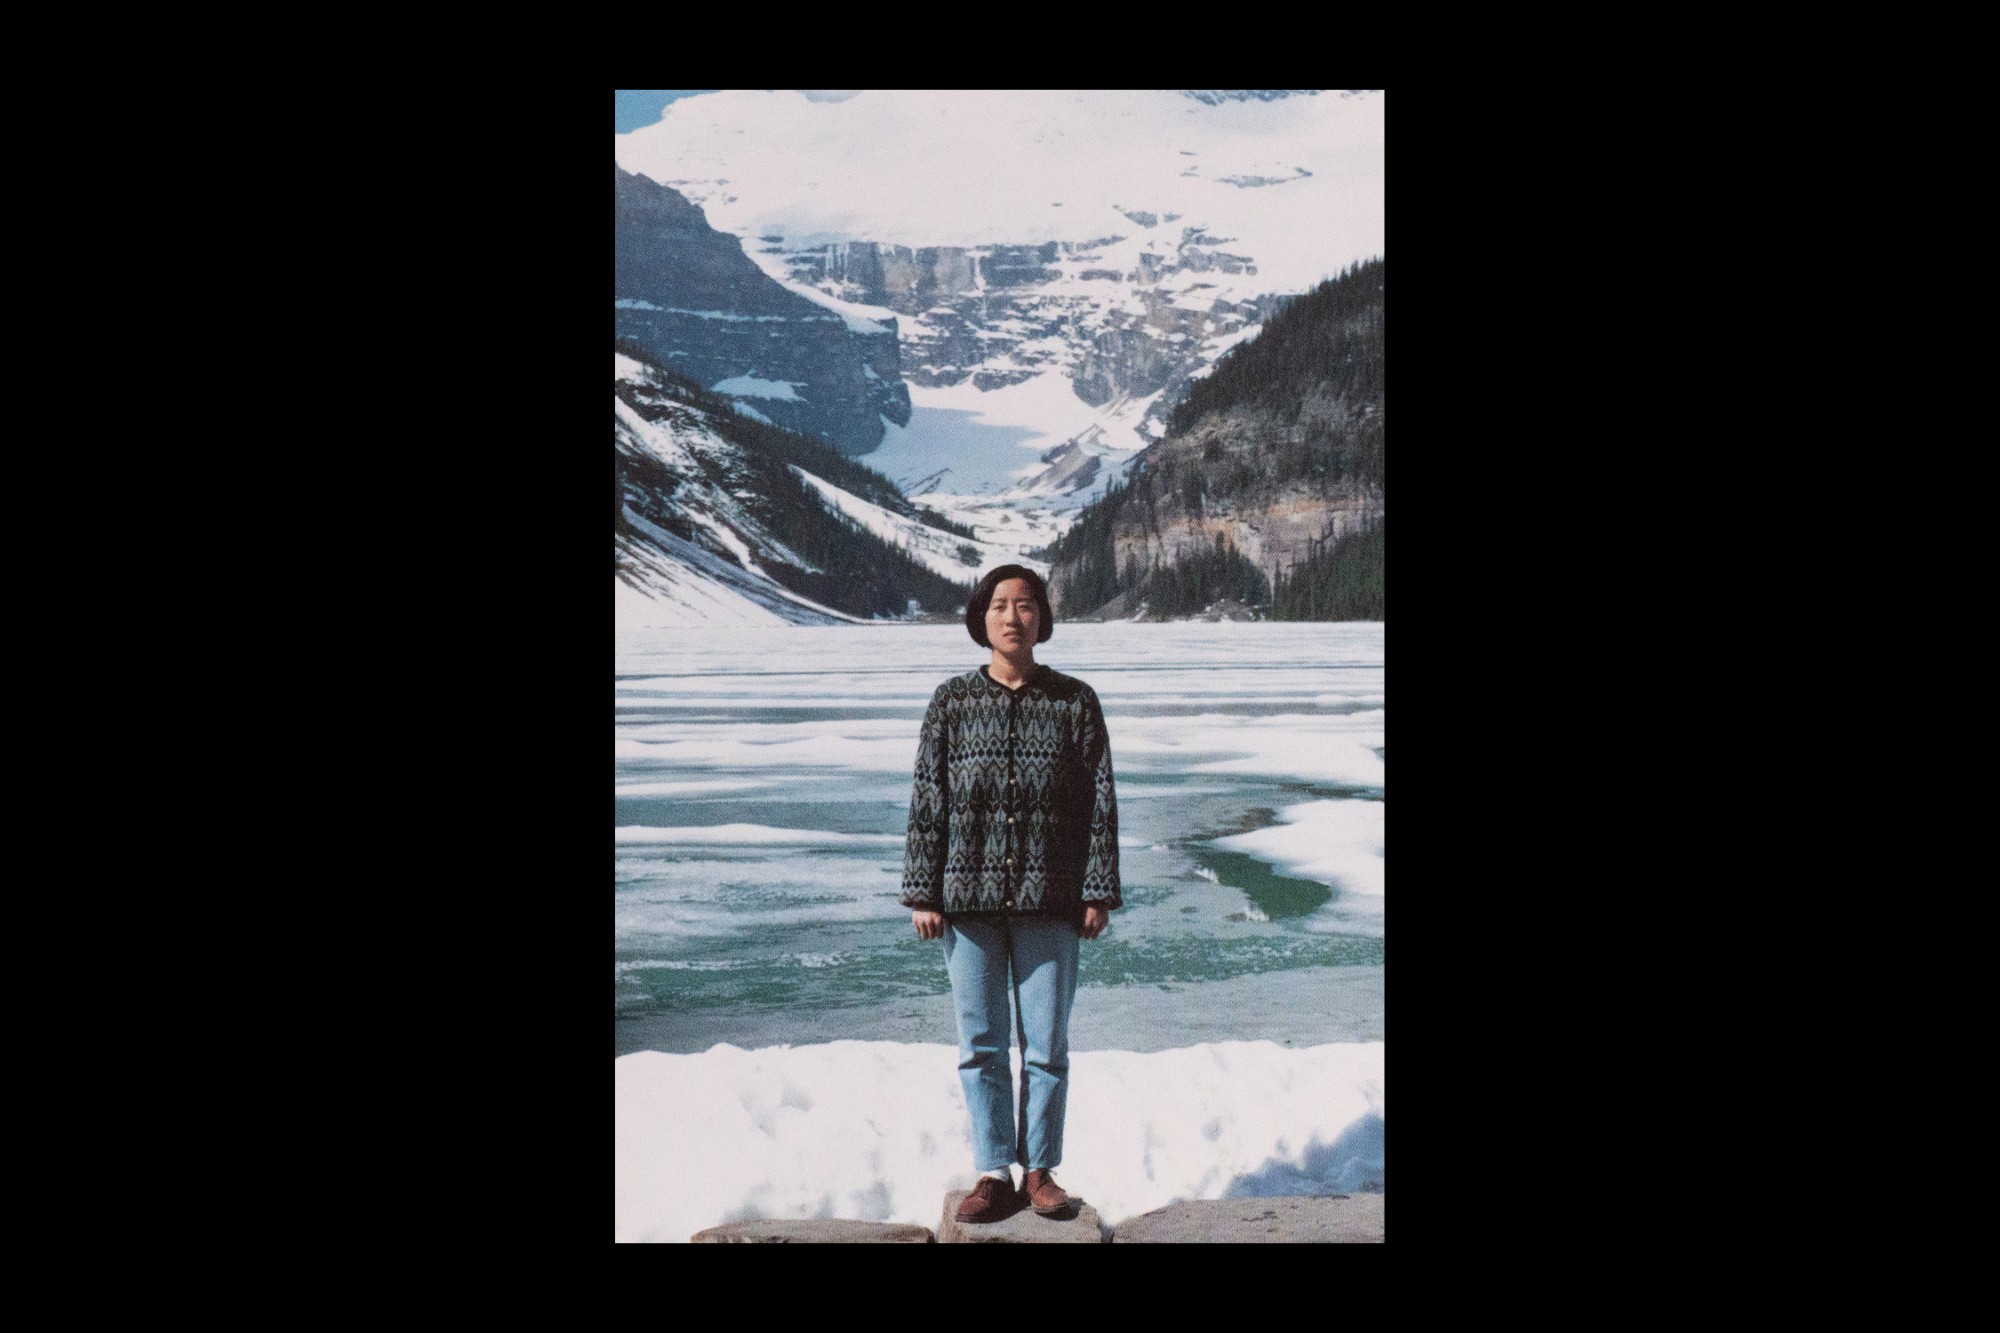 [Image Description: A postcard image shows the artist Jin-me Yoon standing before the frozen waters of Lake Louise and snow-covered mountains. She is wearing a dark patterned cardigan sweater, light blue jeans, and brown leather loafers. She stands erect on top of a stone, gazing directly at the camera with her hands forming loose fists by her side.]